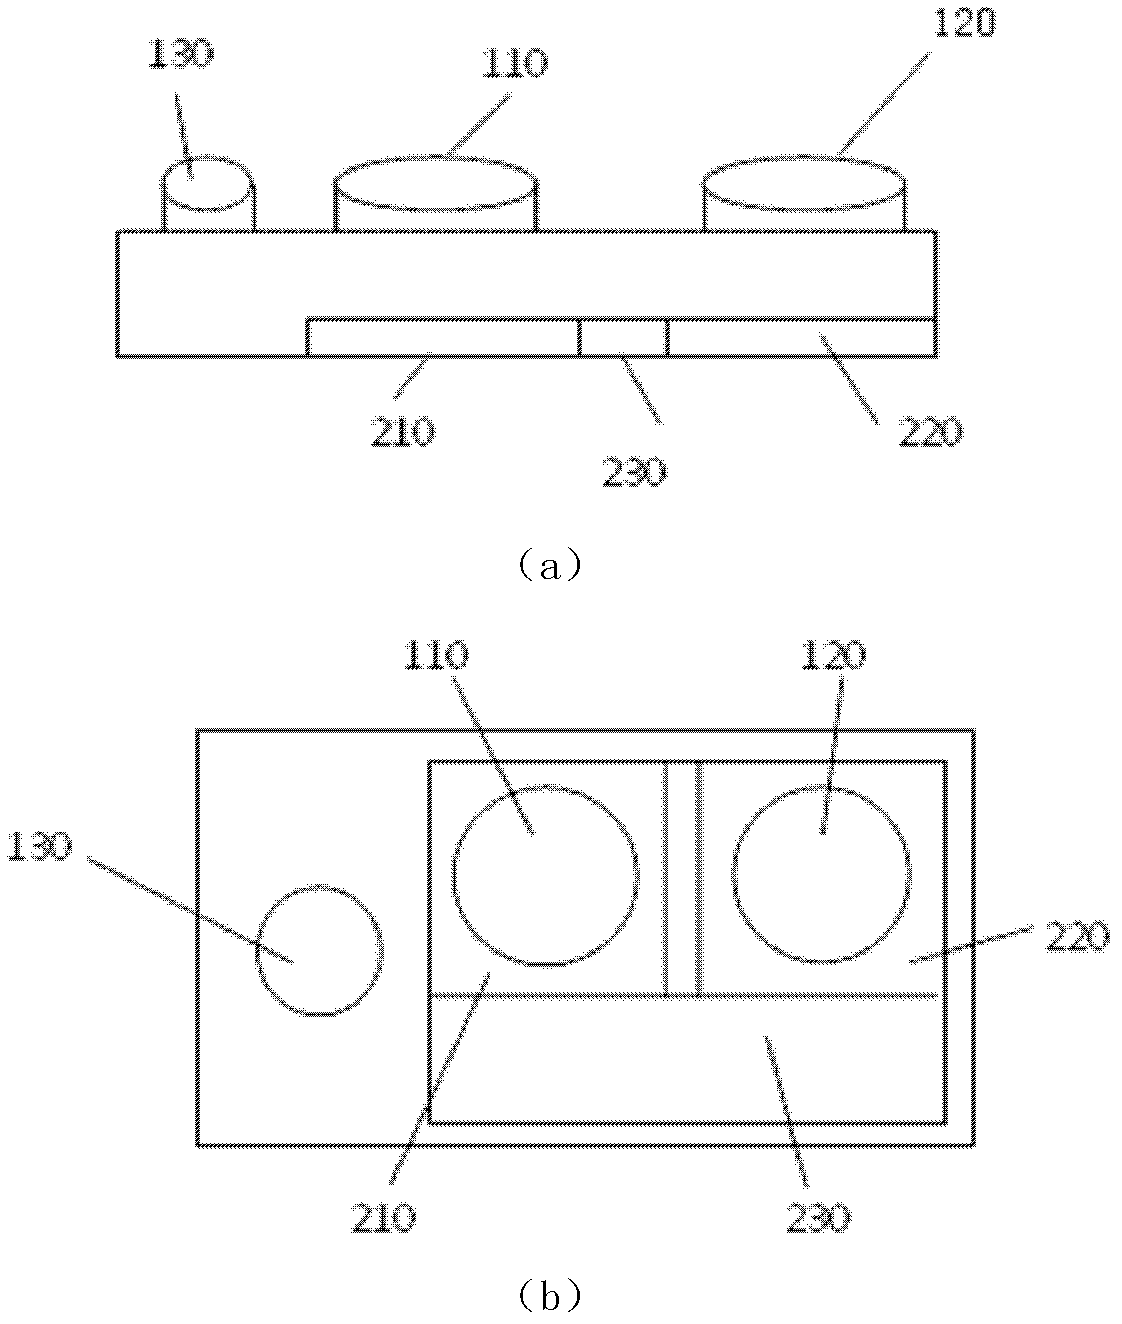 Three-dimensional measurement chip and system based on double-array image sensor